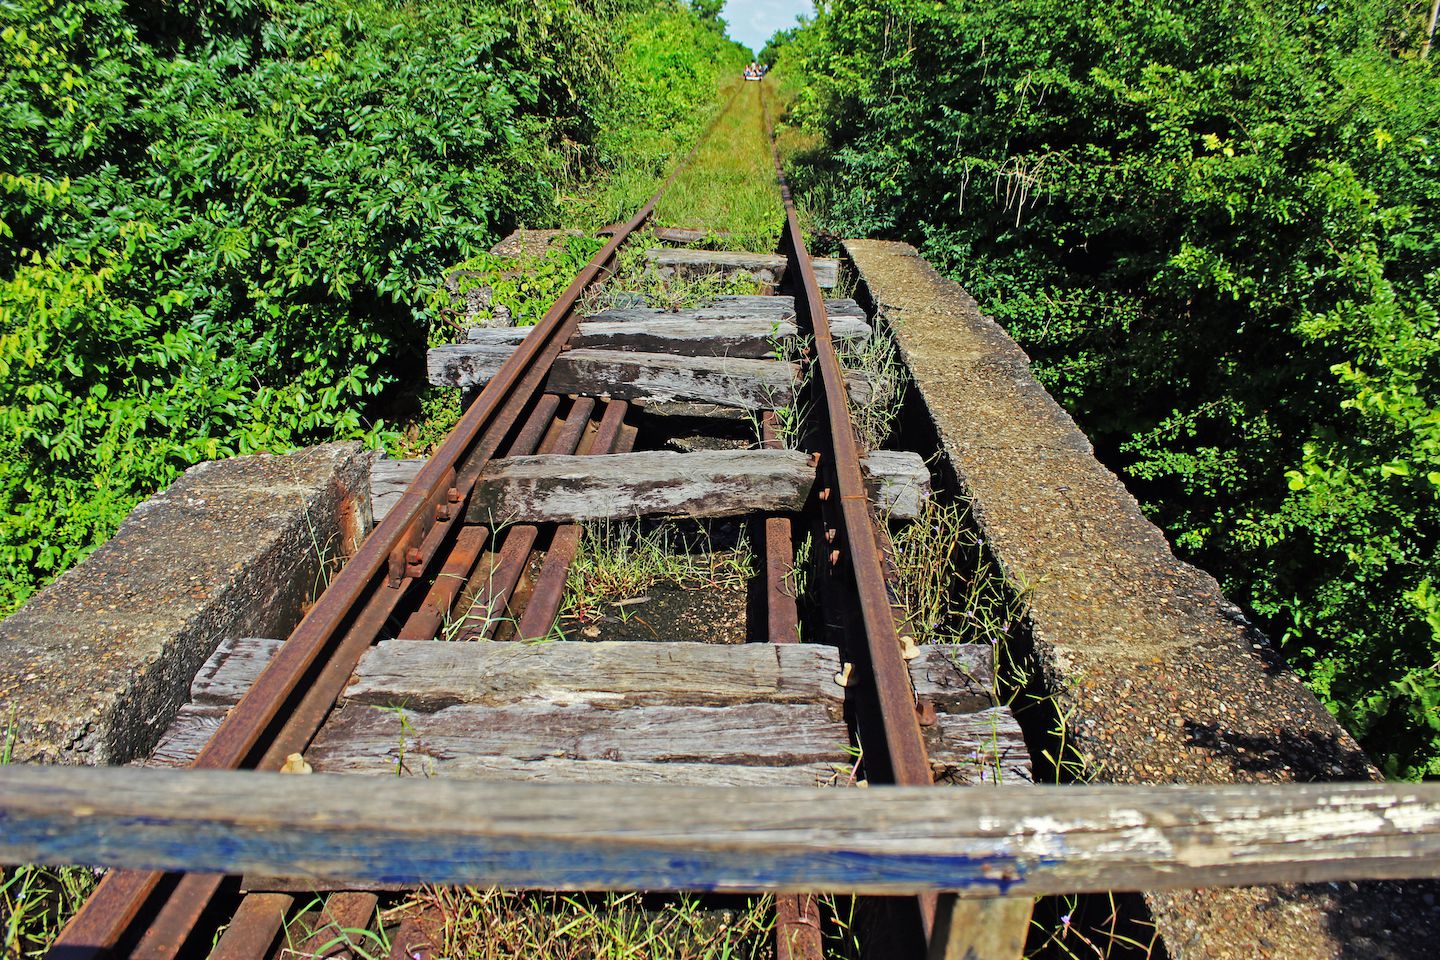 Parts of the railroad where the bamboo trains ran on